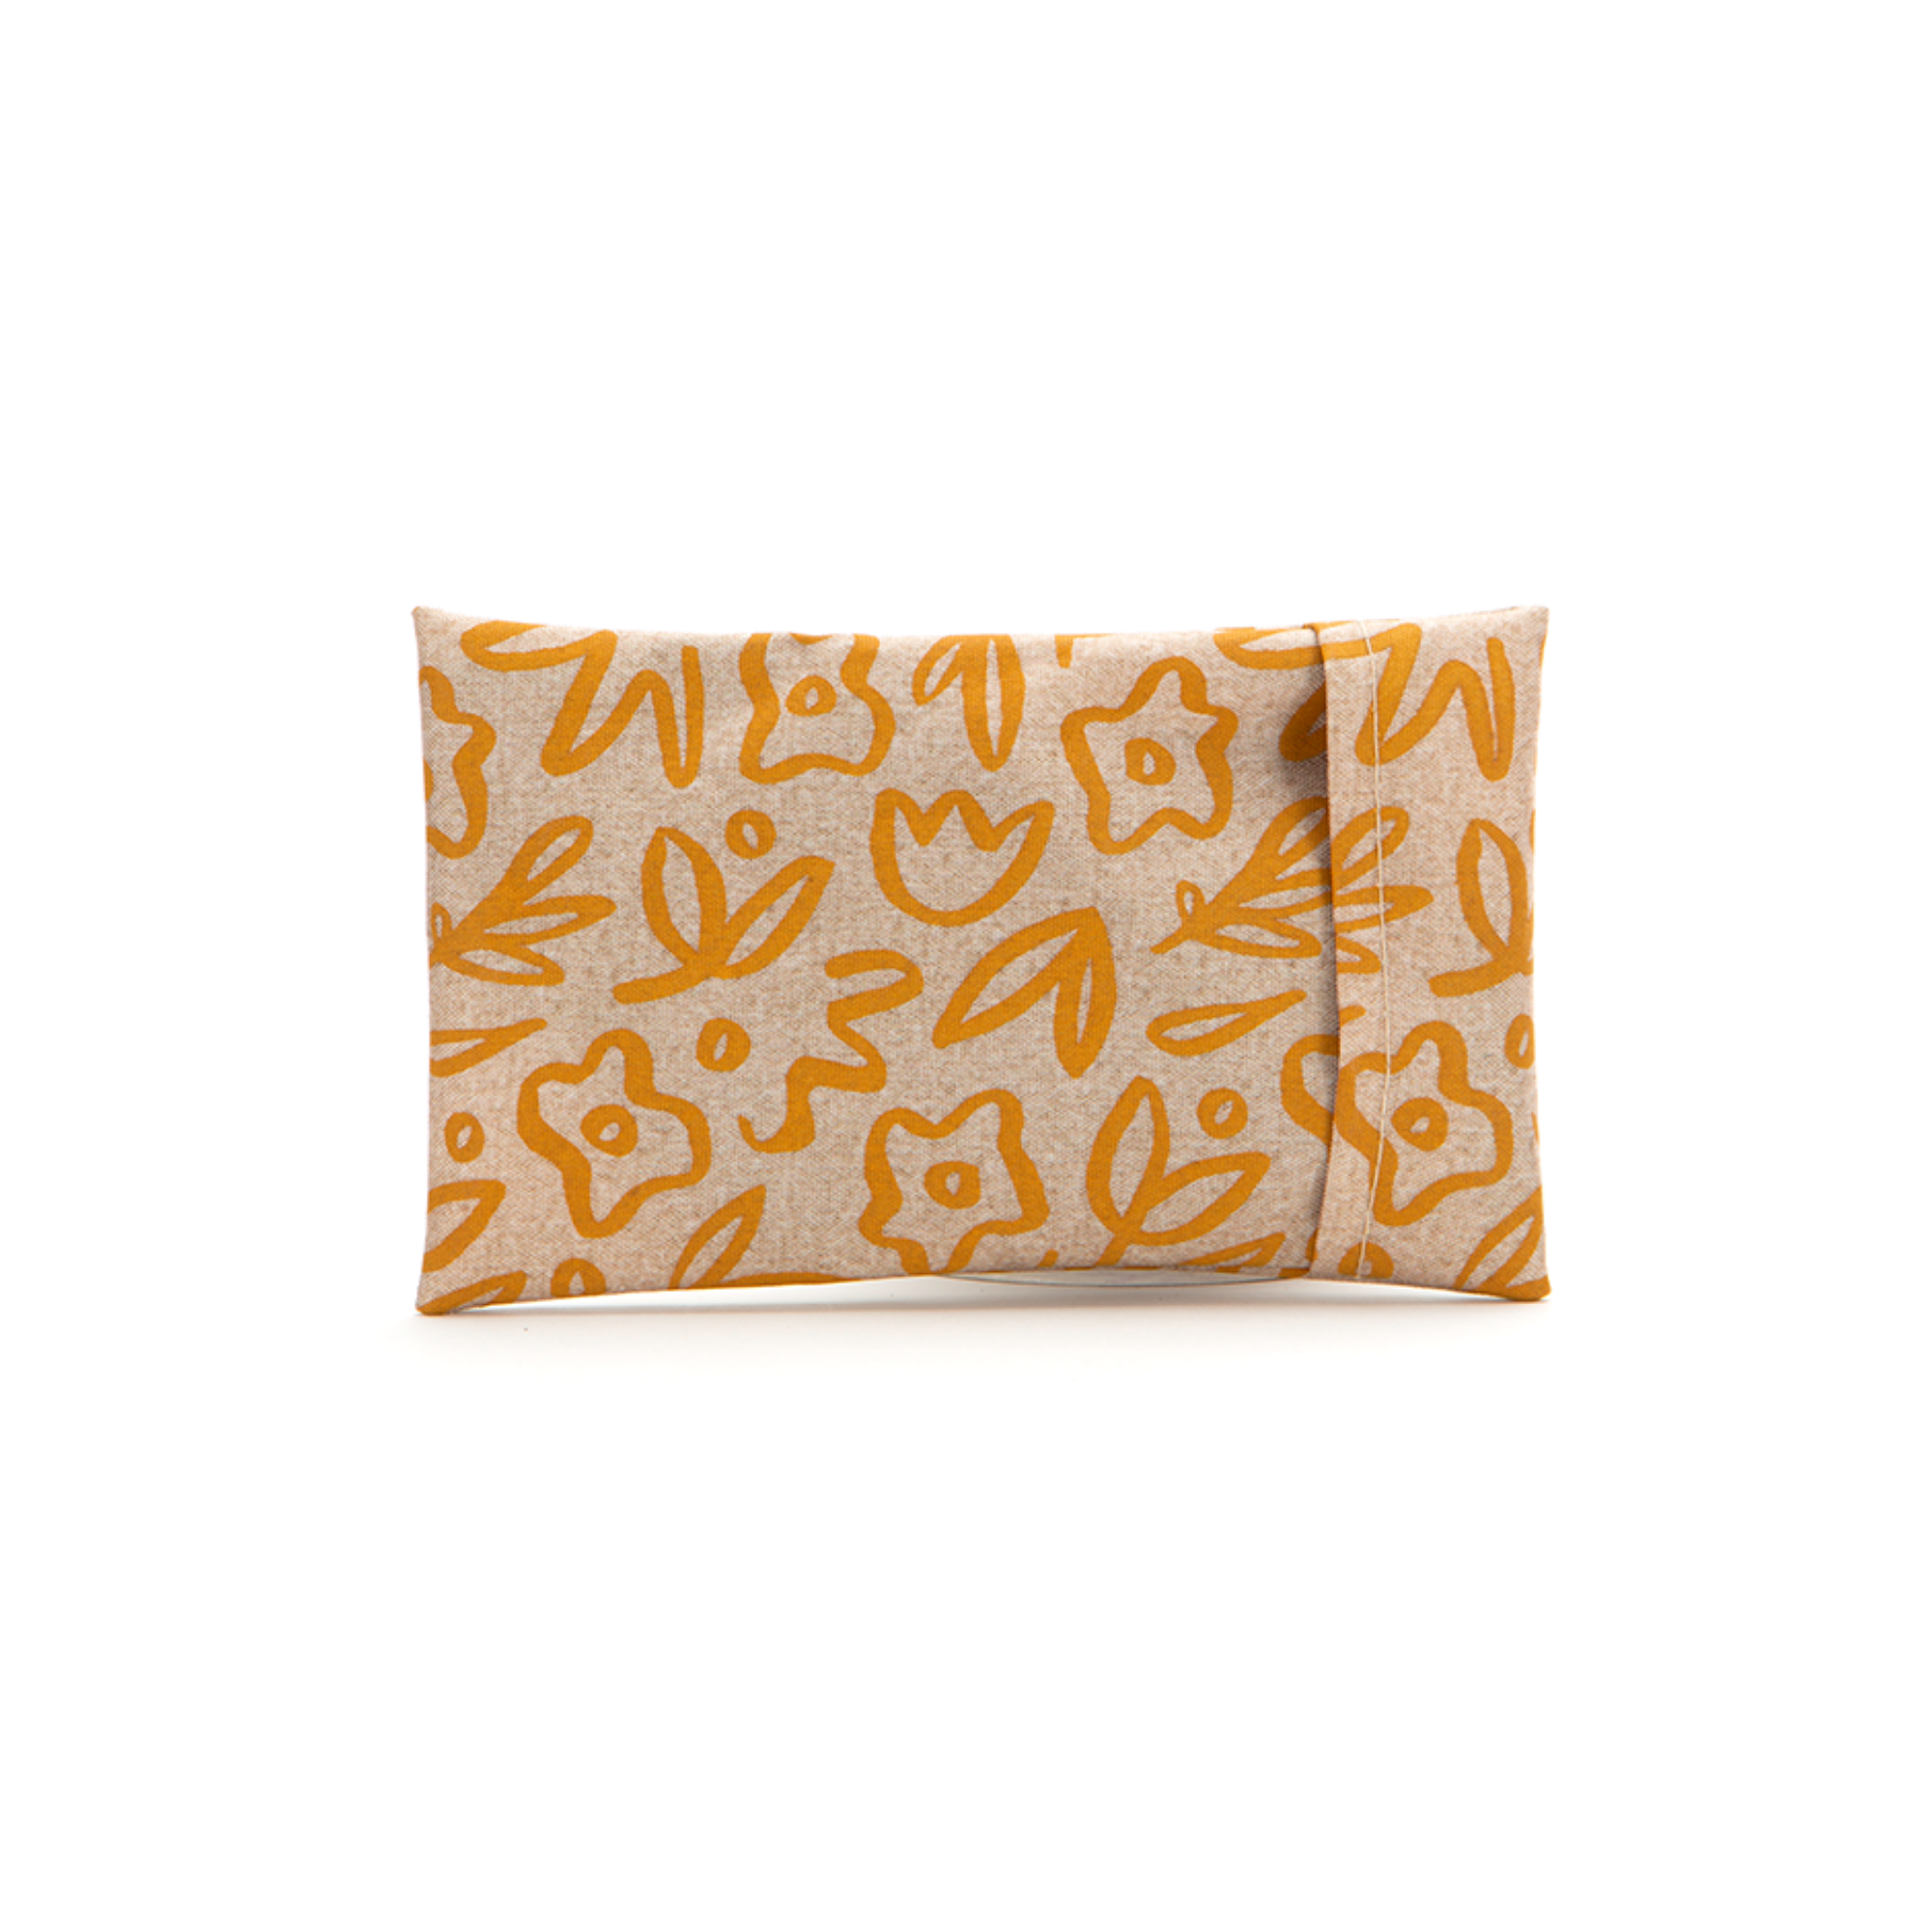 Golden Wildflowers Ice Pack